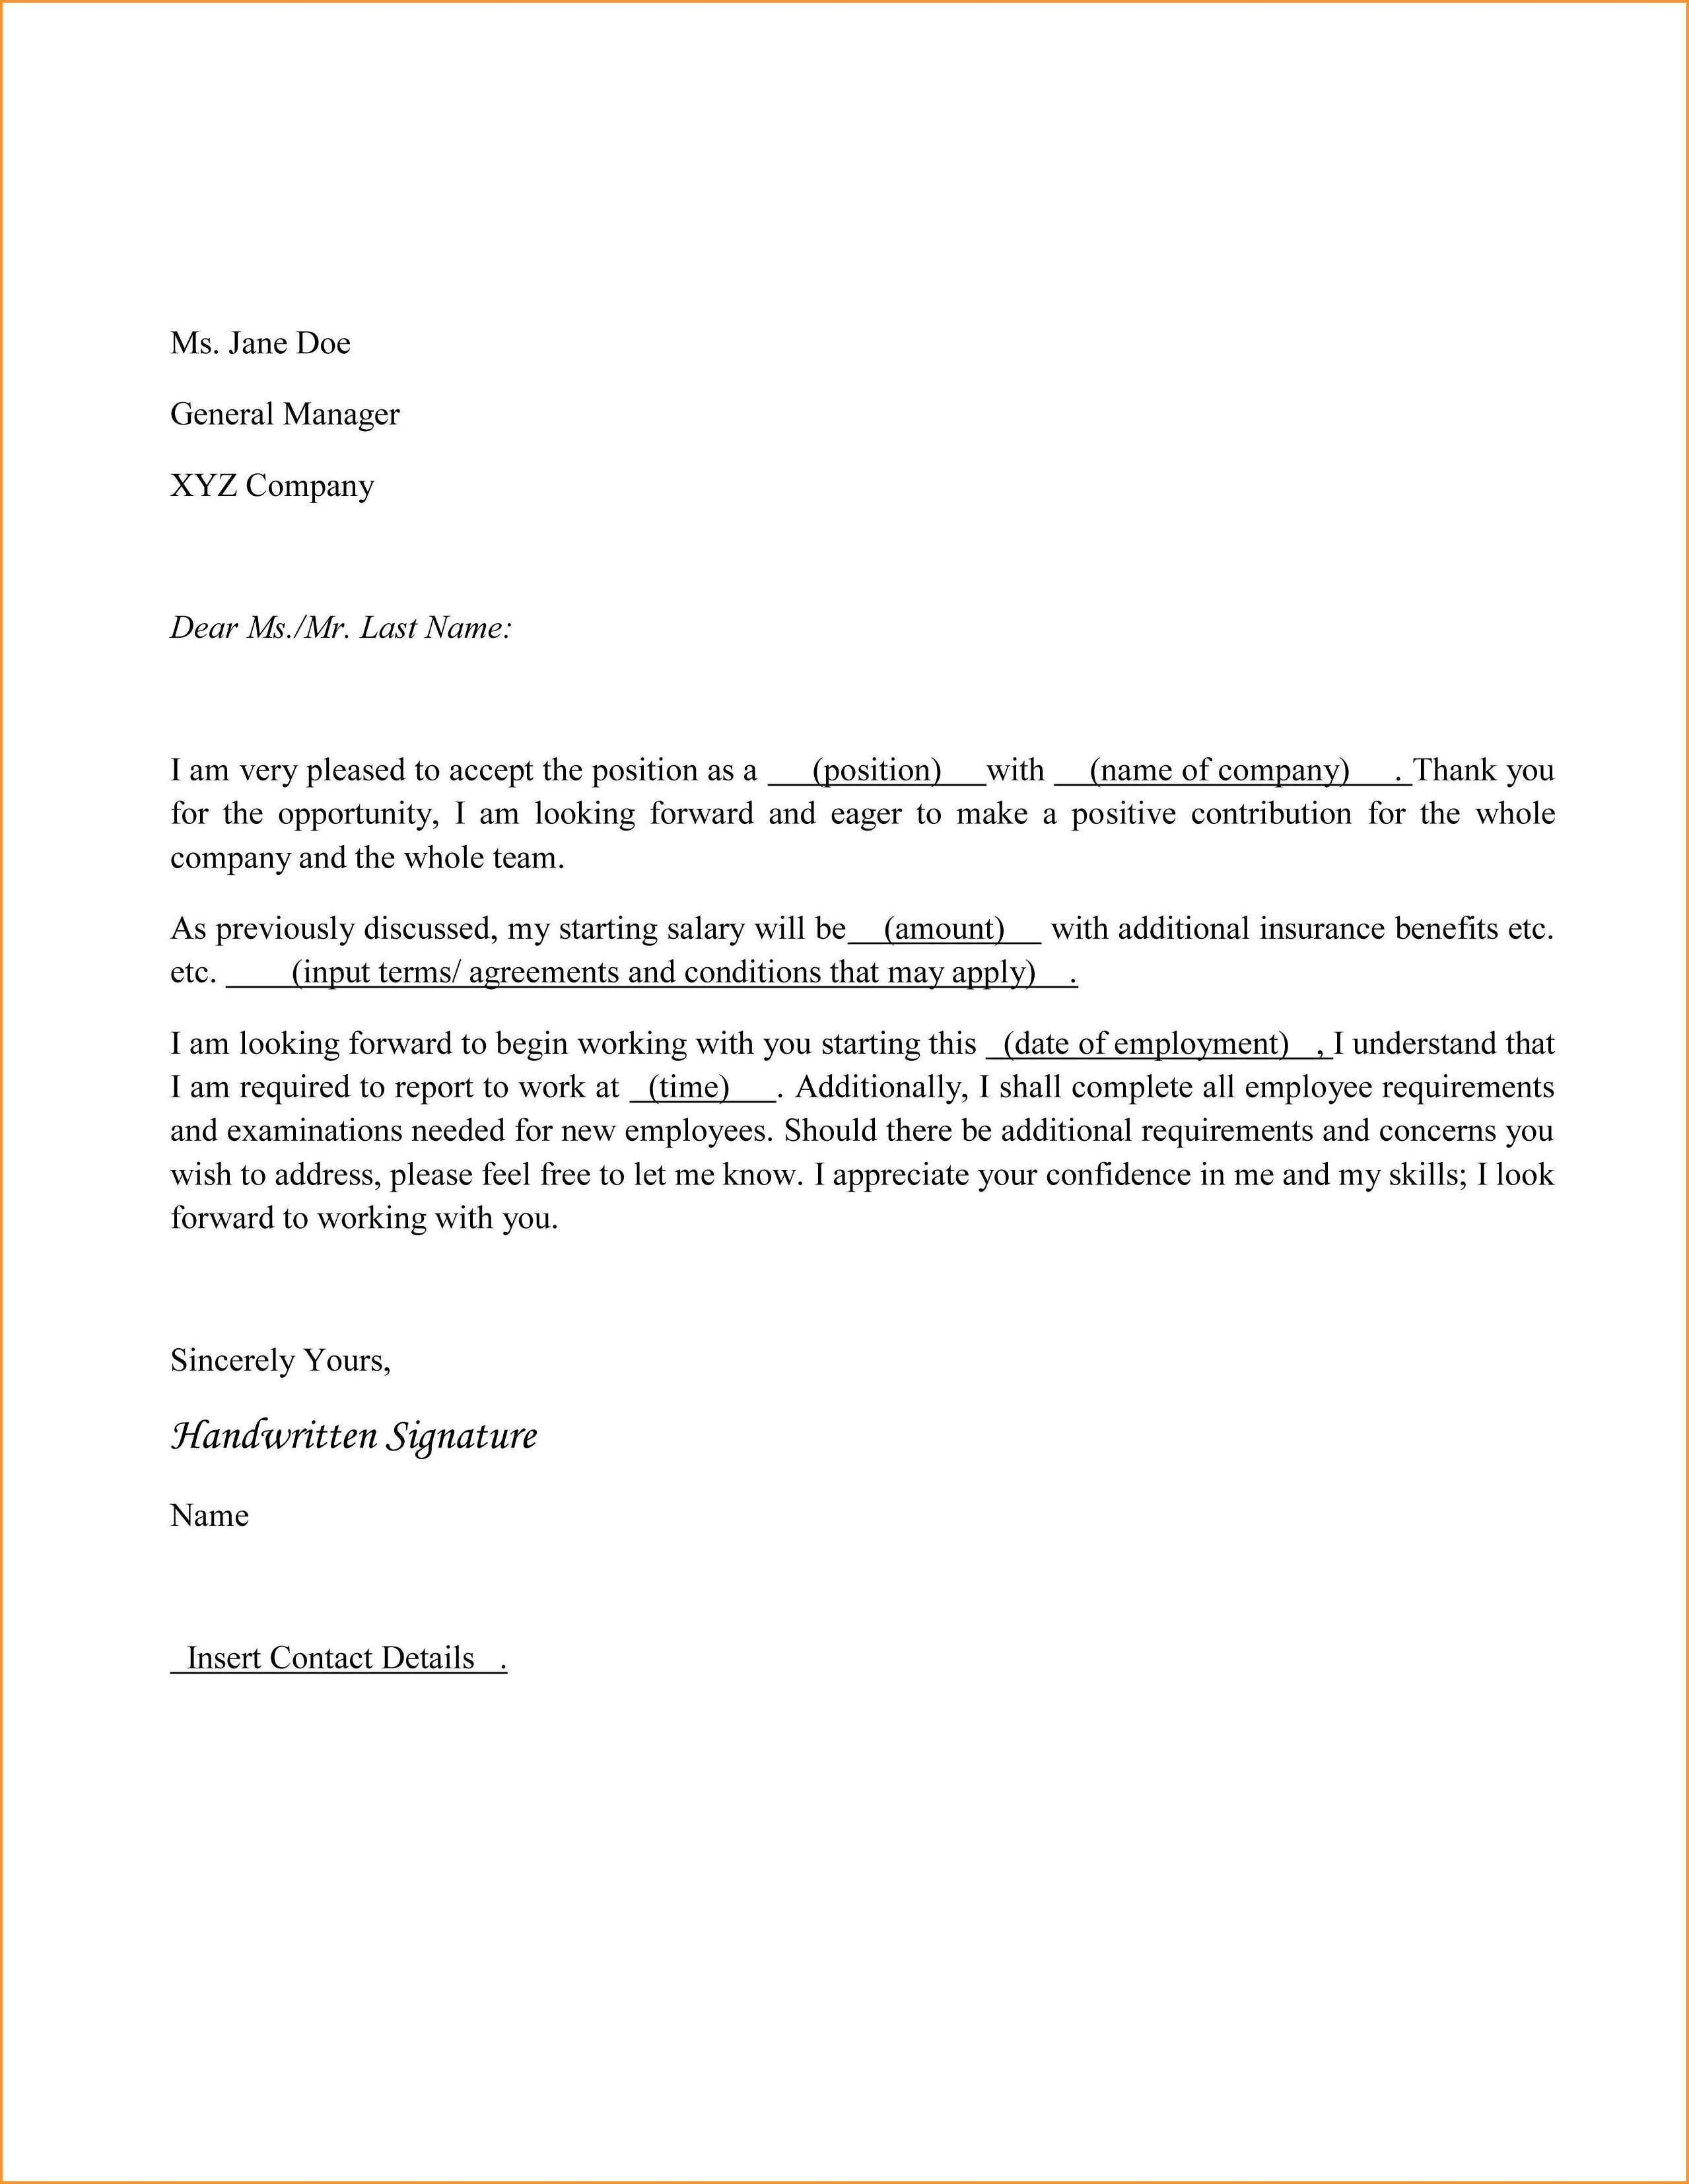 Job Offer Acceptance Letter Template - Thank You Letter Accepting A Job Fer Fresh Job Fer Letter Reply